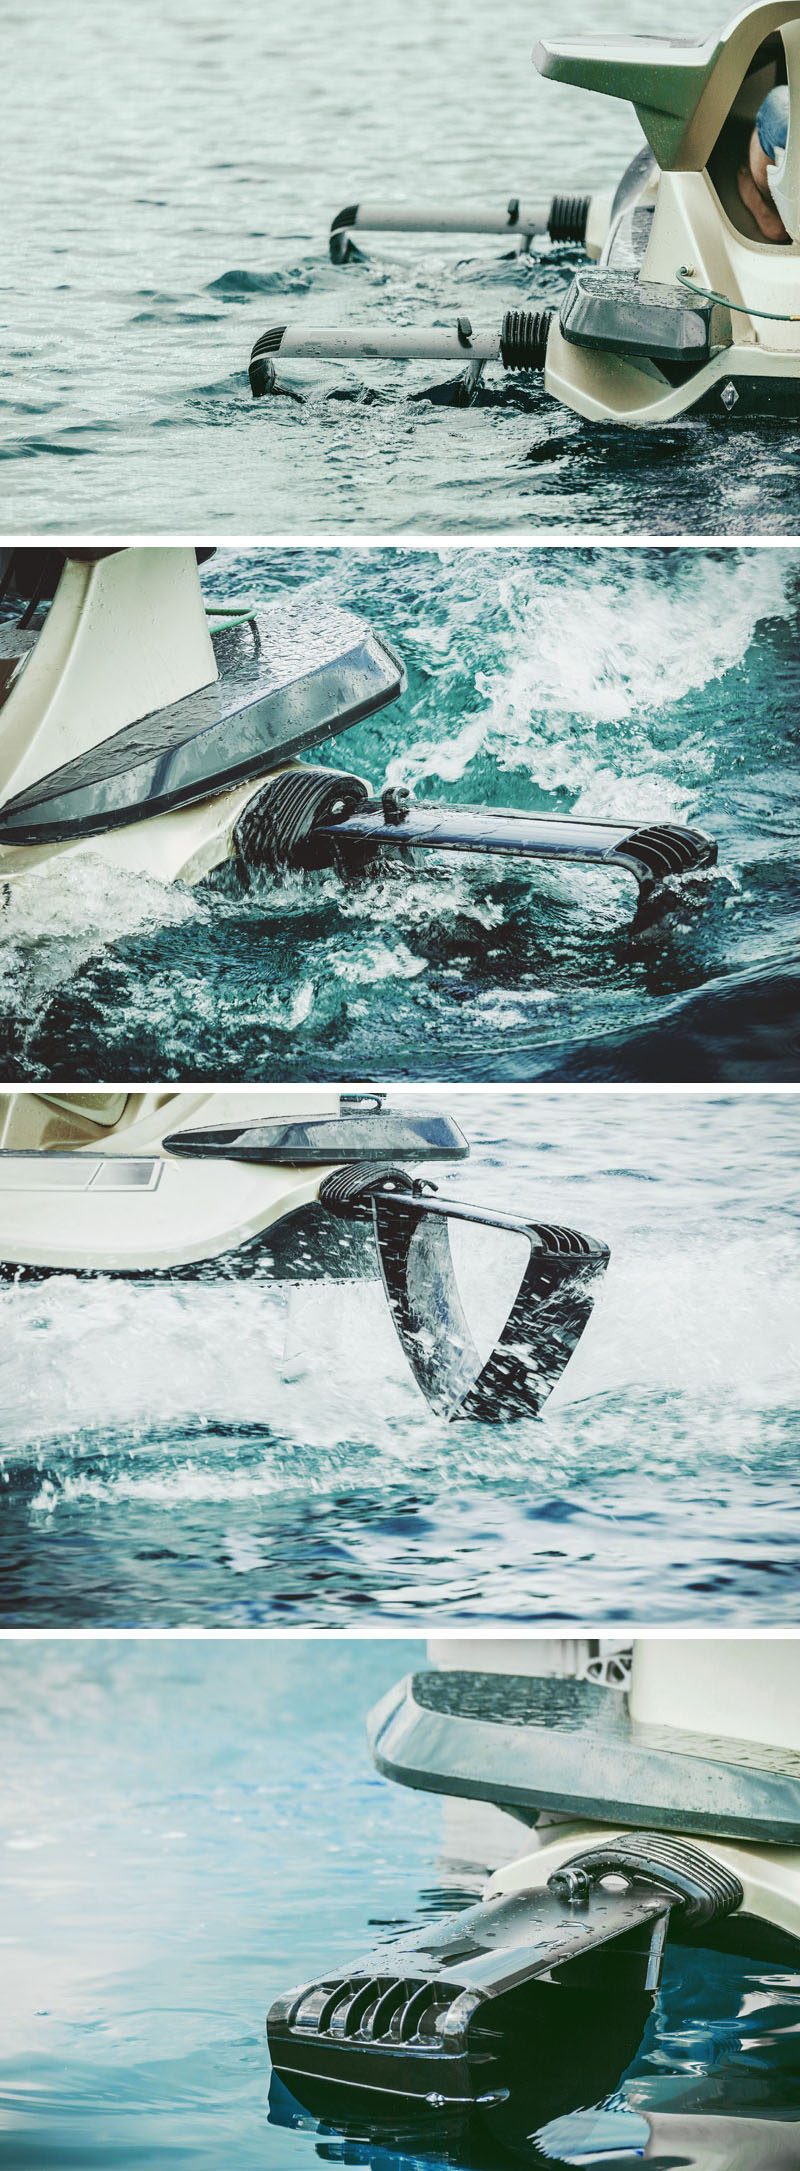 The Q2S electric watercraft by Quadrofoil has a sleek design that allows it to lift out of the water and simulate the feeling of flying.